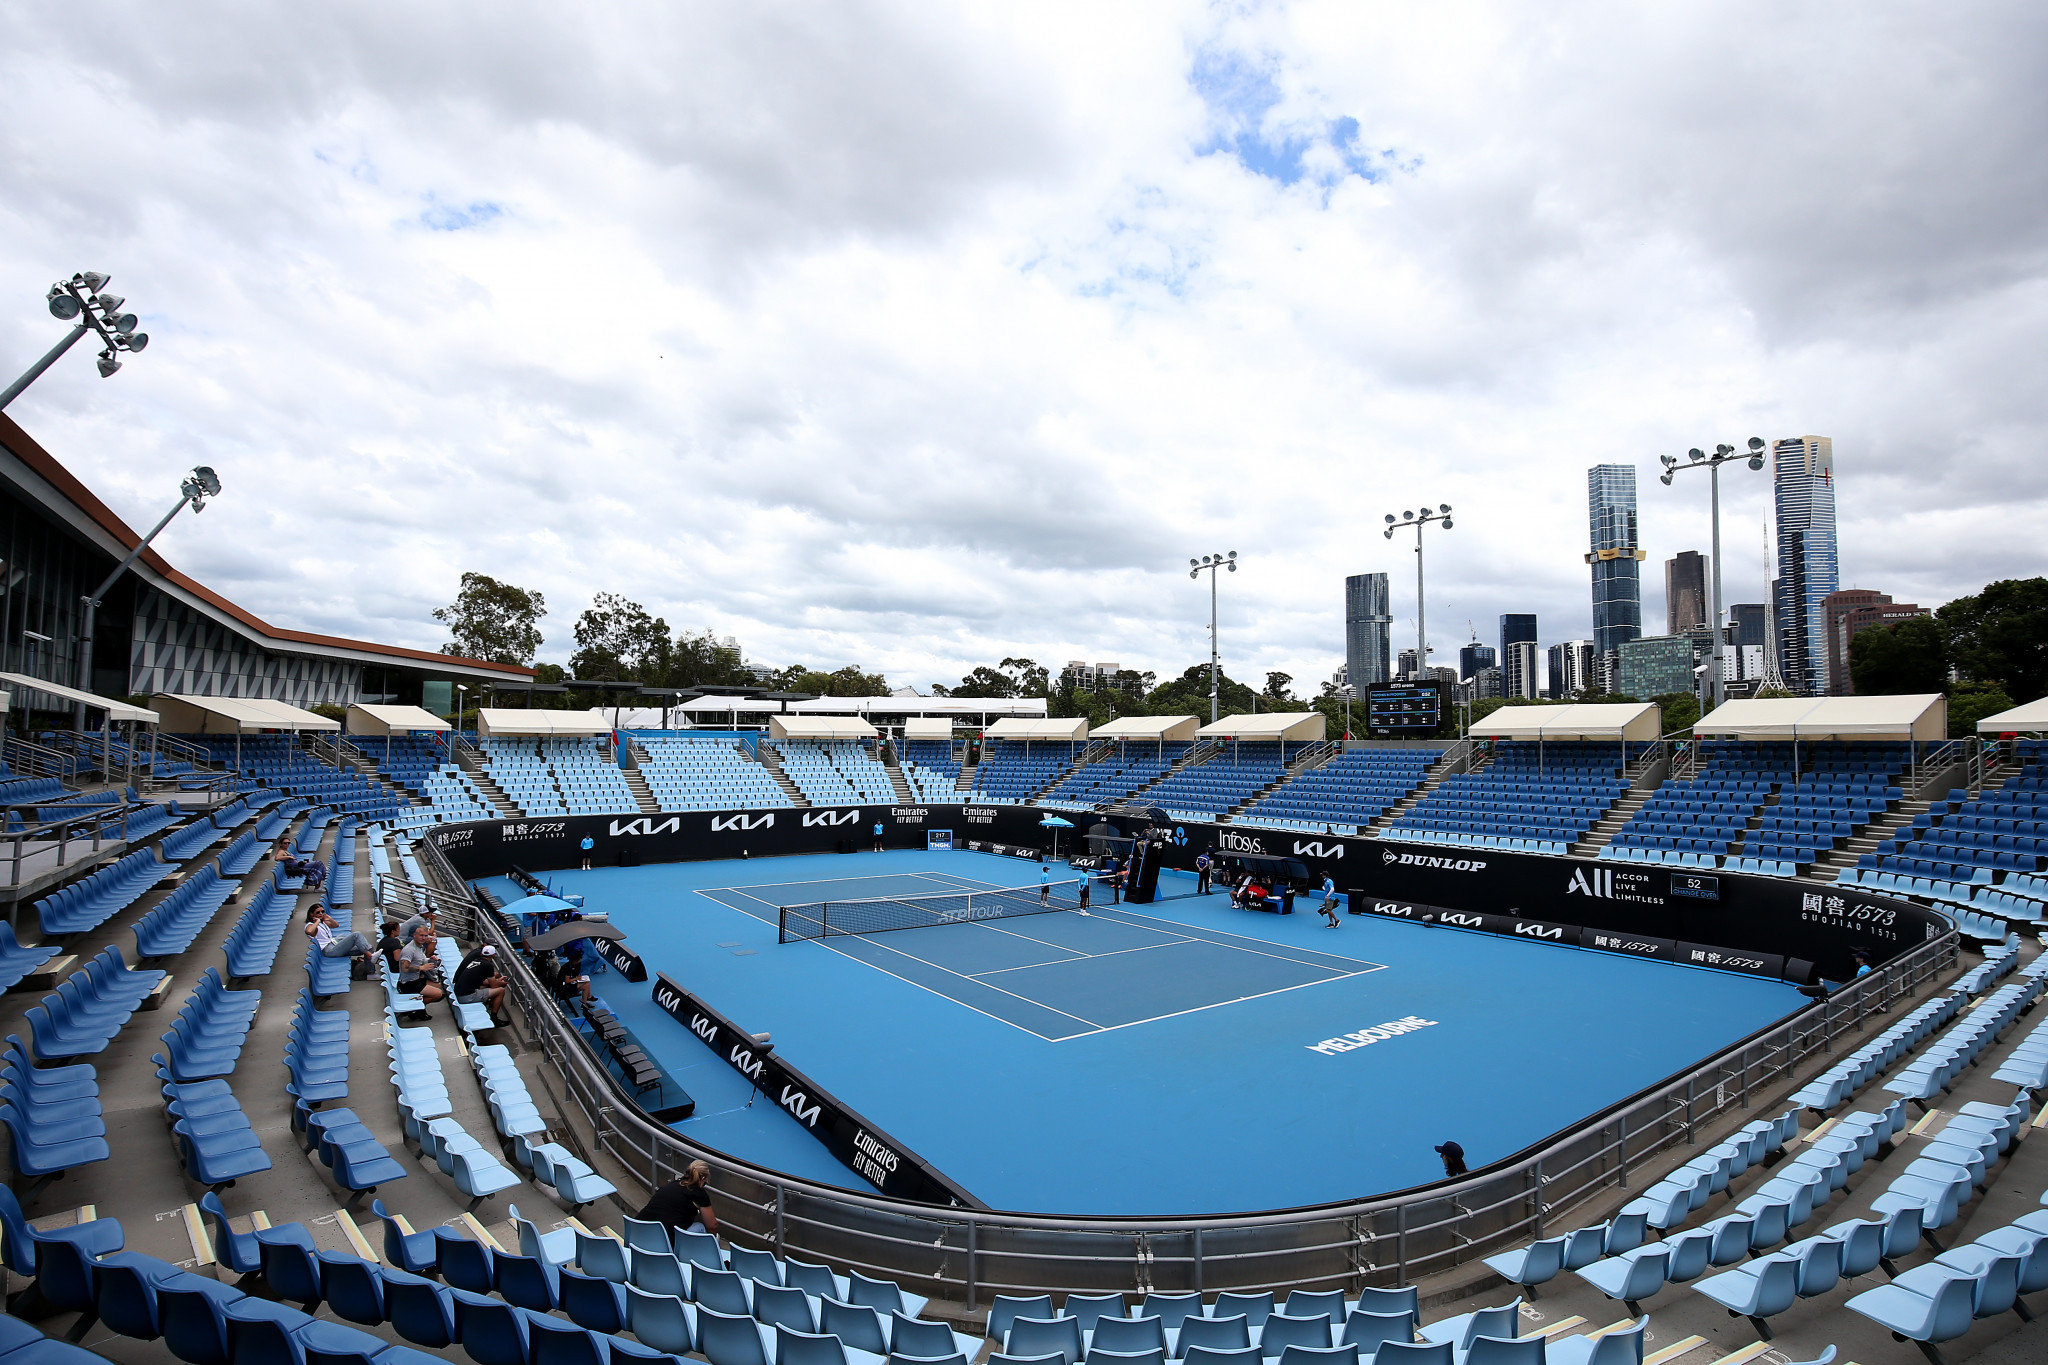 Players return negative COVID-19 tests as Australian Open draw revealed